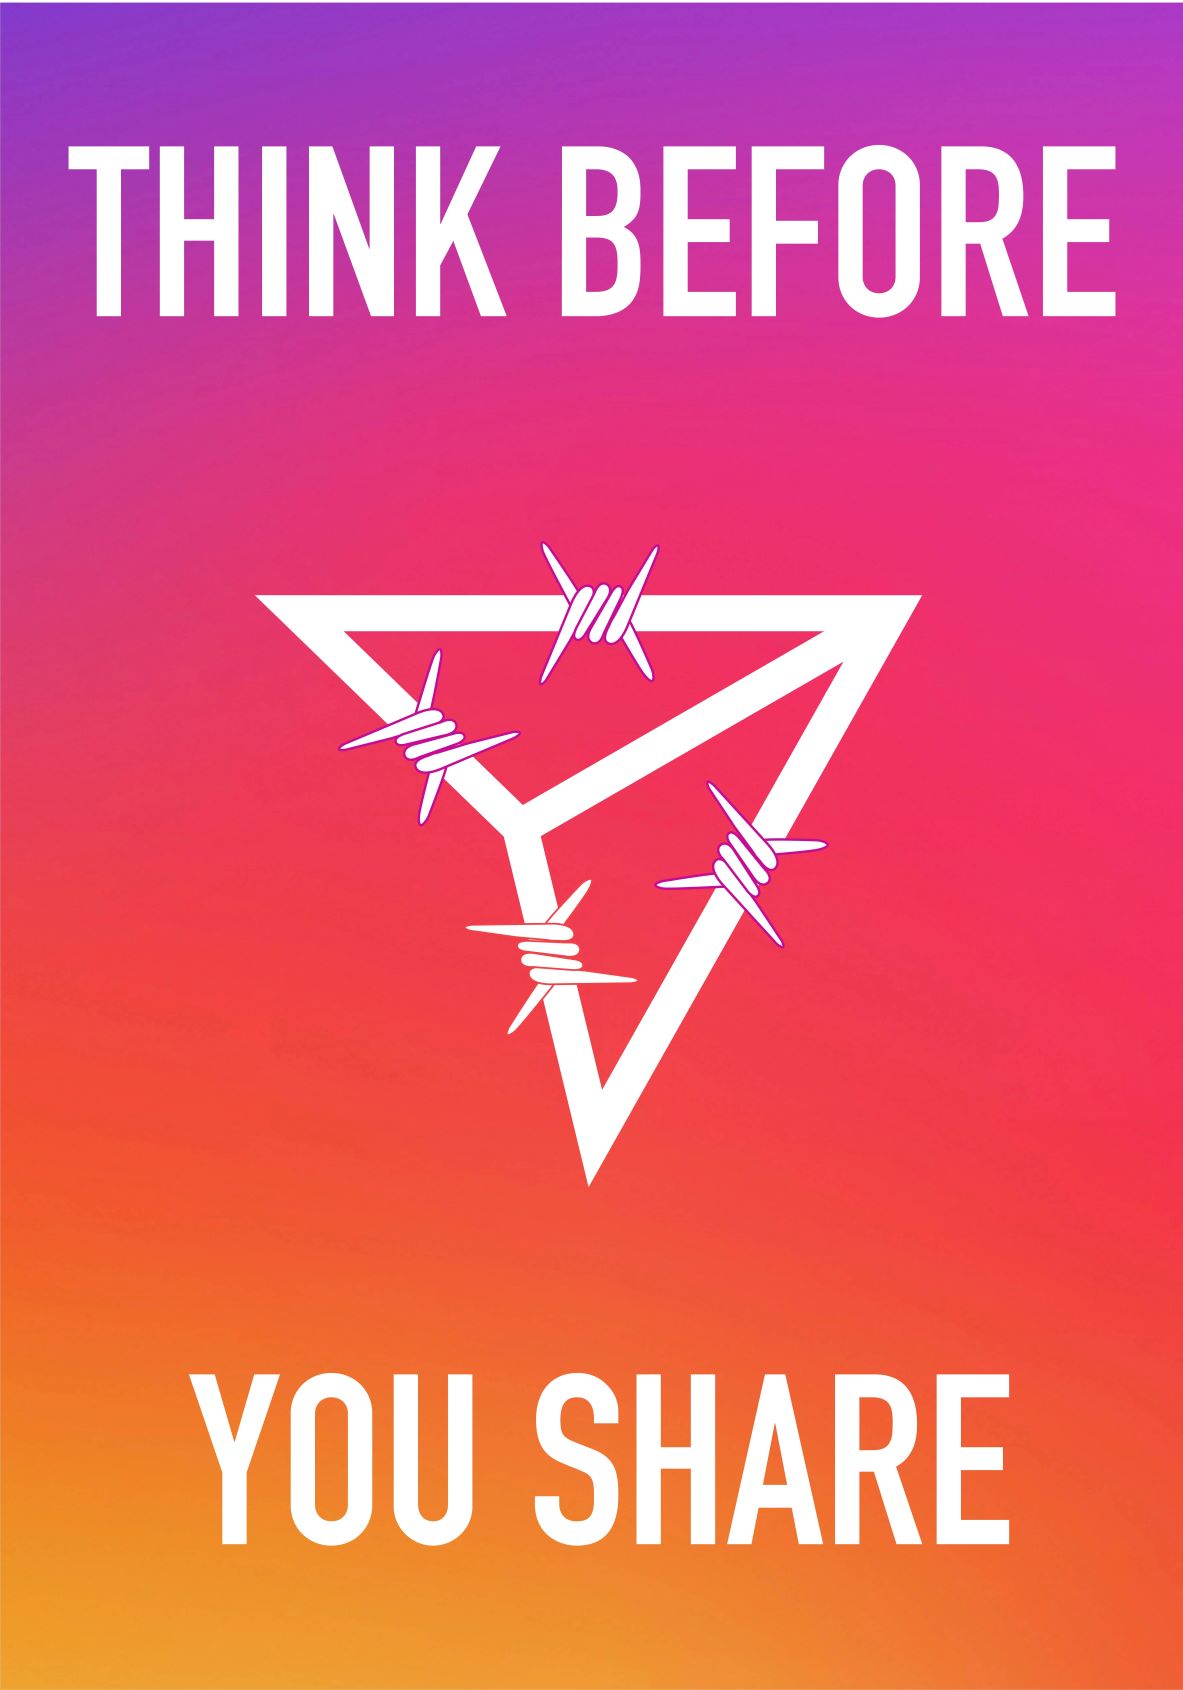 Image for Instagram that reads Think Before You Share